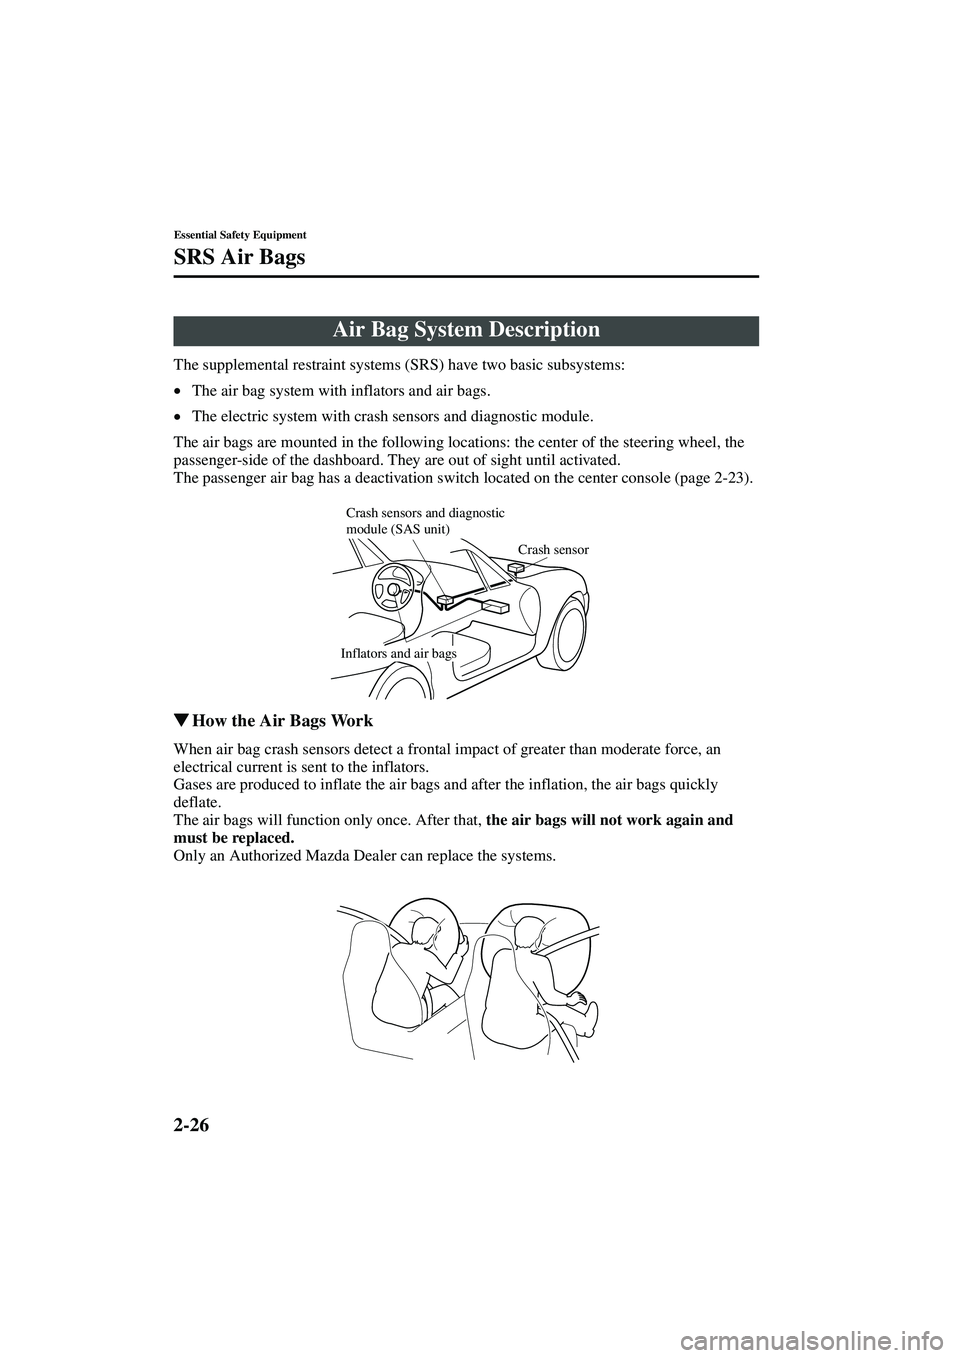 MAZDA MODEL MX-5 MIATA 2004  Owners Manual 2-26
Essential Safety Equipment
SRS Air Bags
Form No. 8S15-EA-03G
The supplemental restraint systems (SRS) have two basic subsystems:
•The air bag system with inflators and air bags.
• The electri